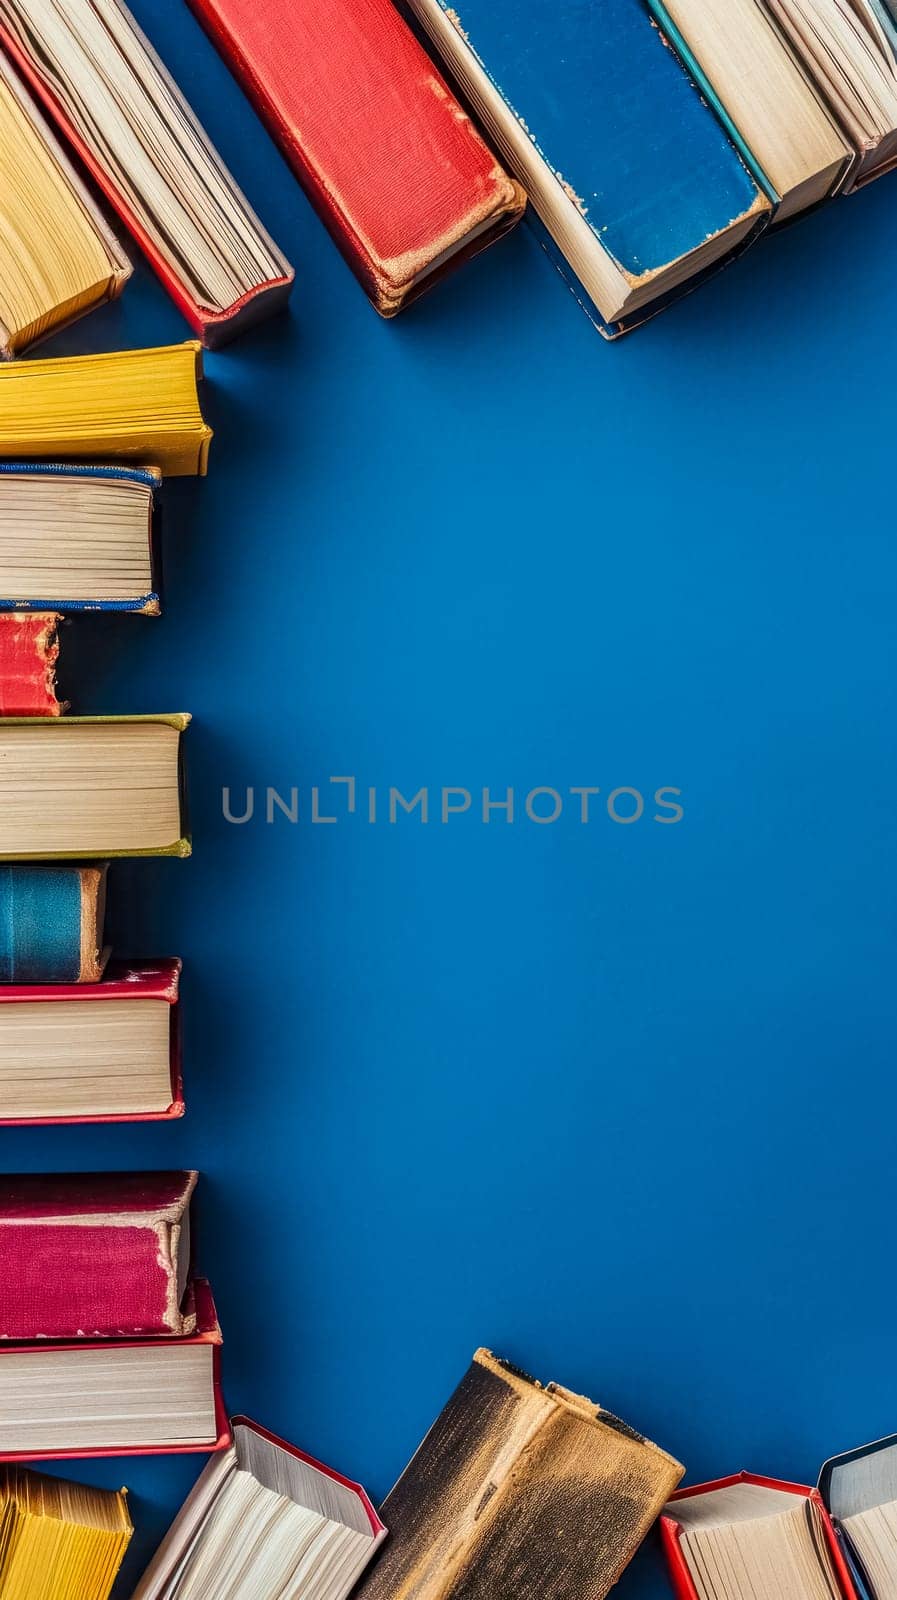 books with their spines facing out, forming a semi-circle against a vibrant blue background, suggesting a world of knowledge and the joy of reading by Edophoto